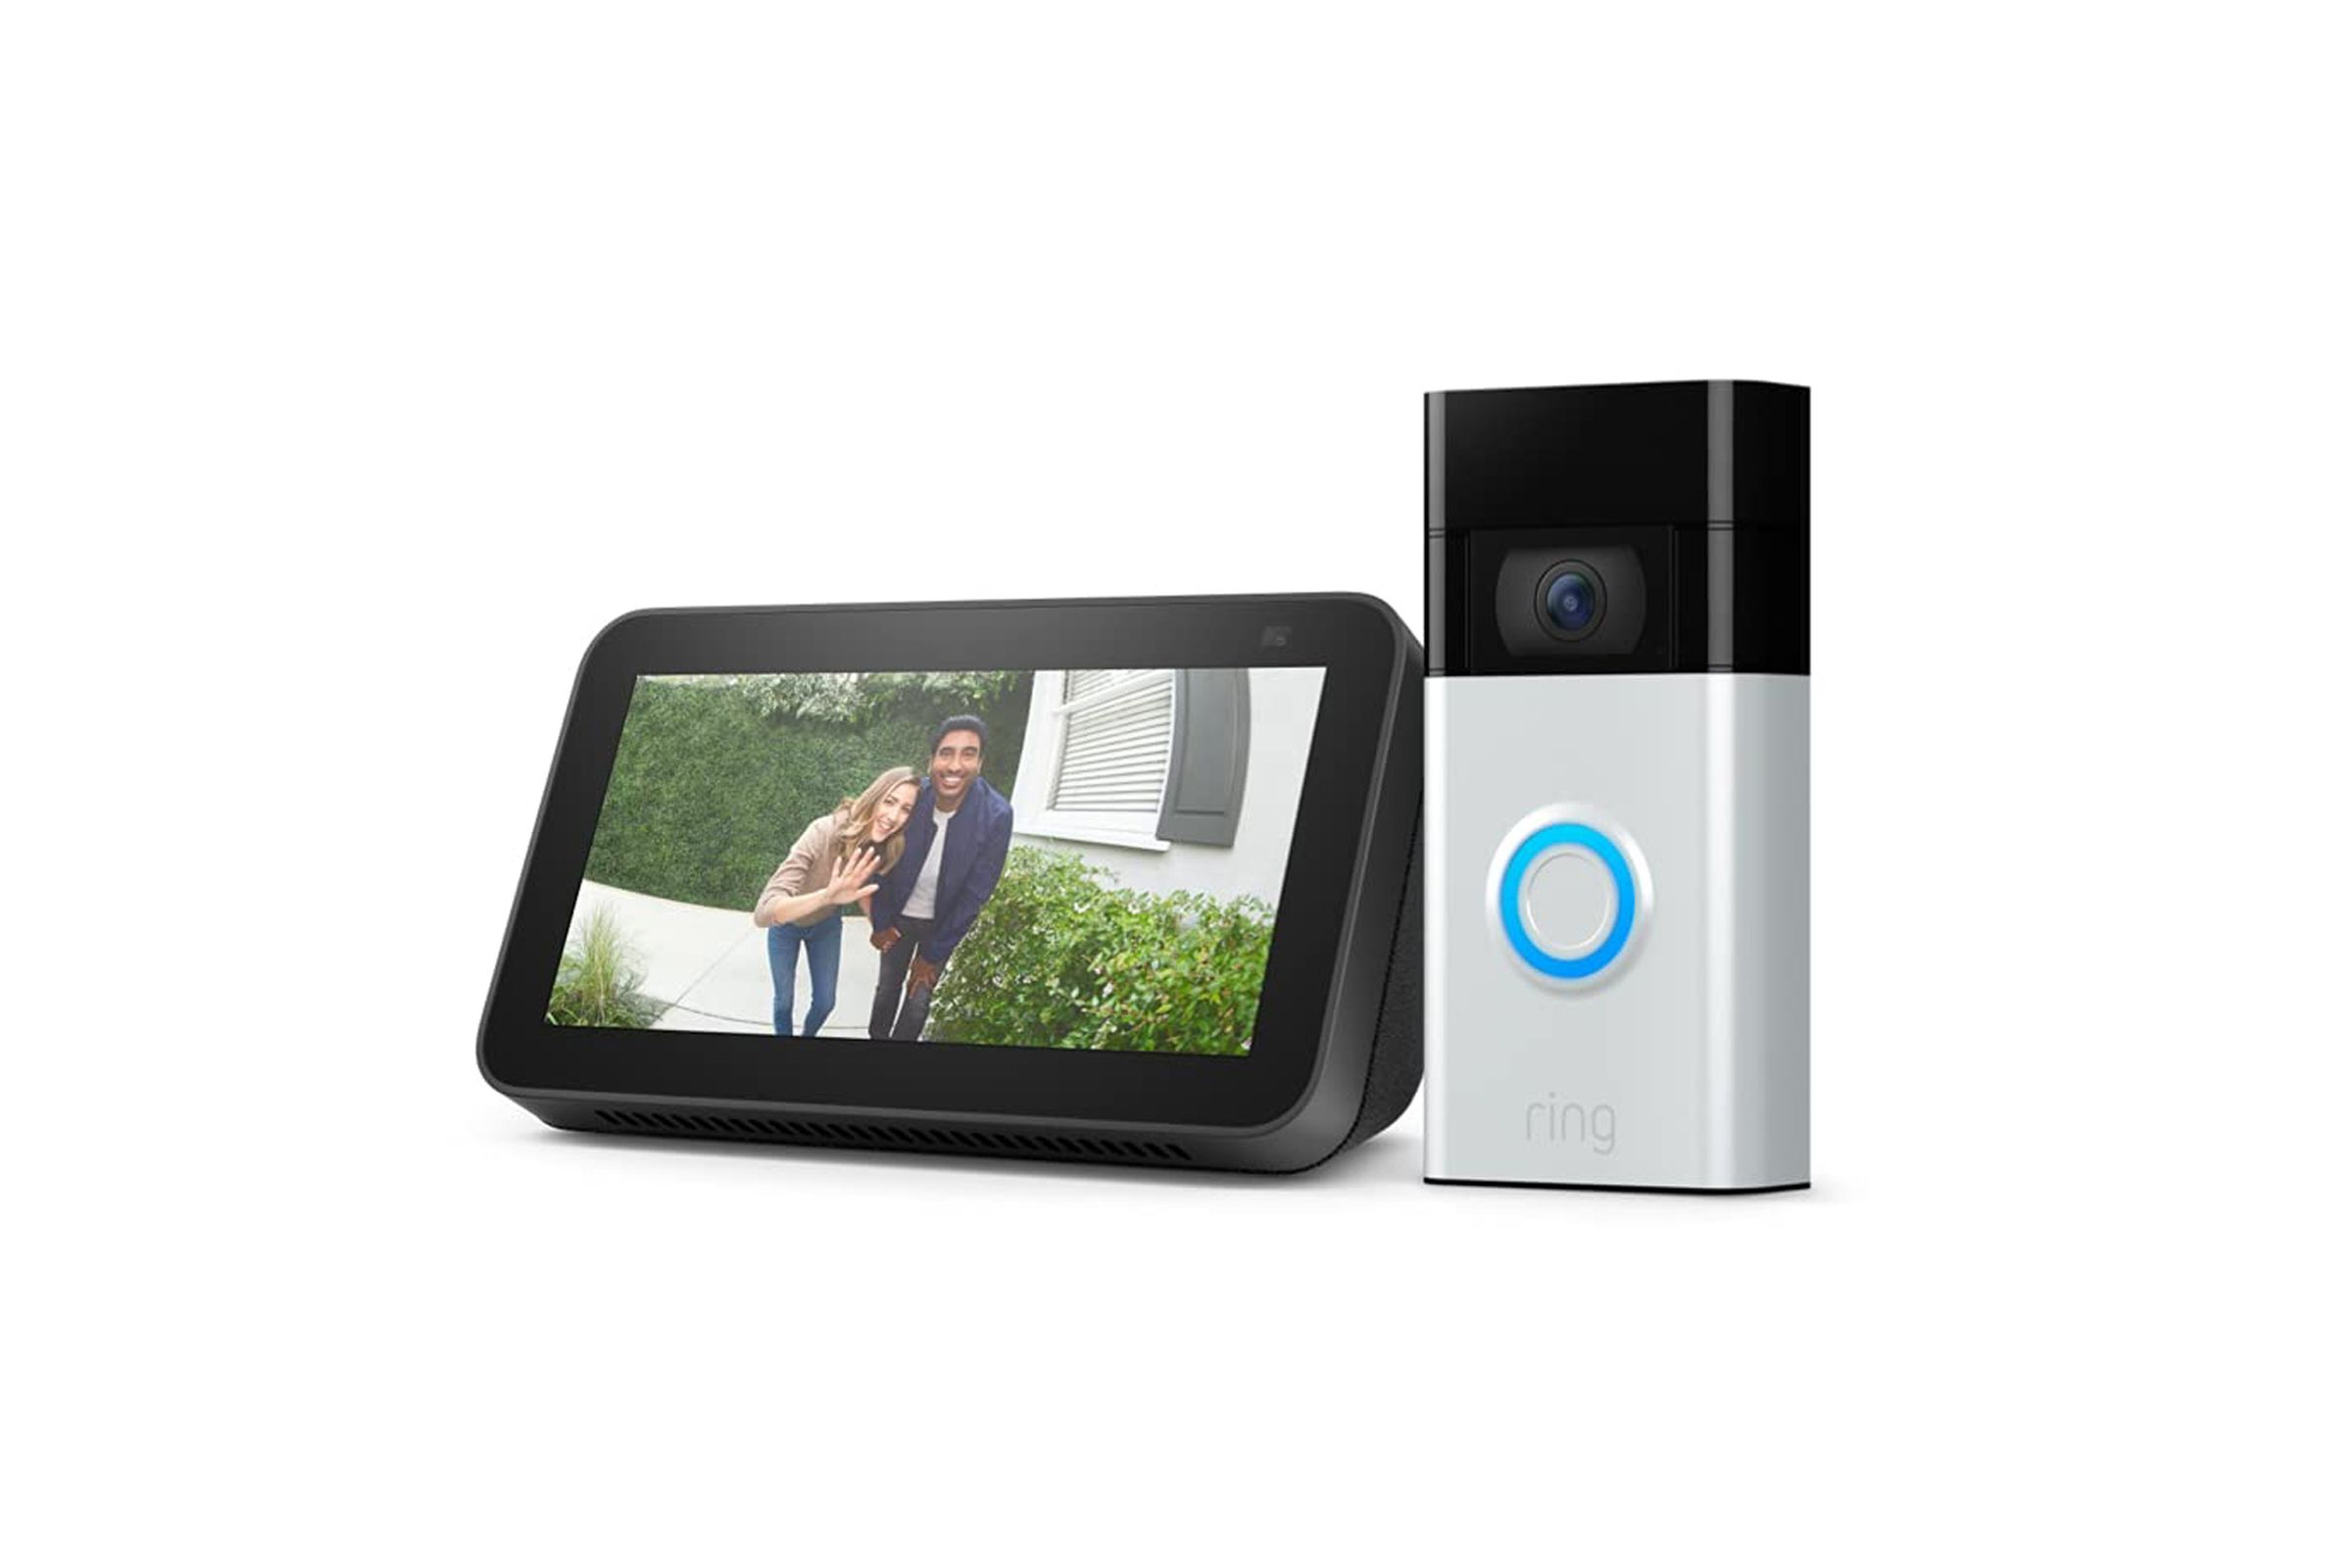 Echo Show devices can also display the live video feed from your Ring doorbell, so you know exactly who’s outside without opening your mobile app.